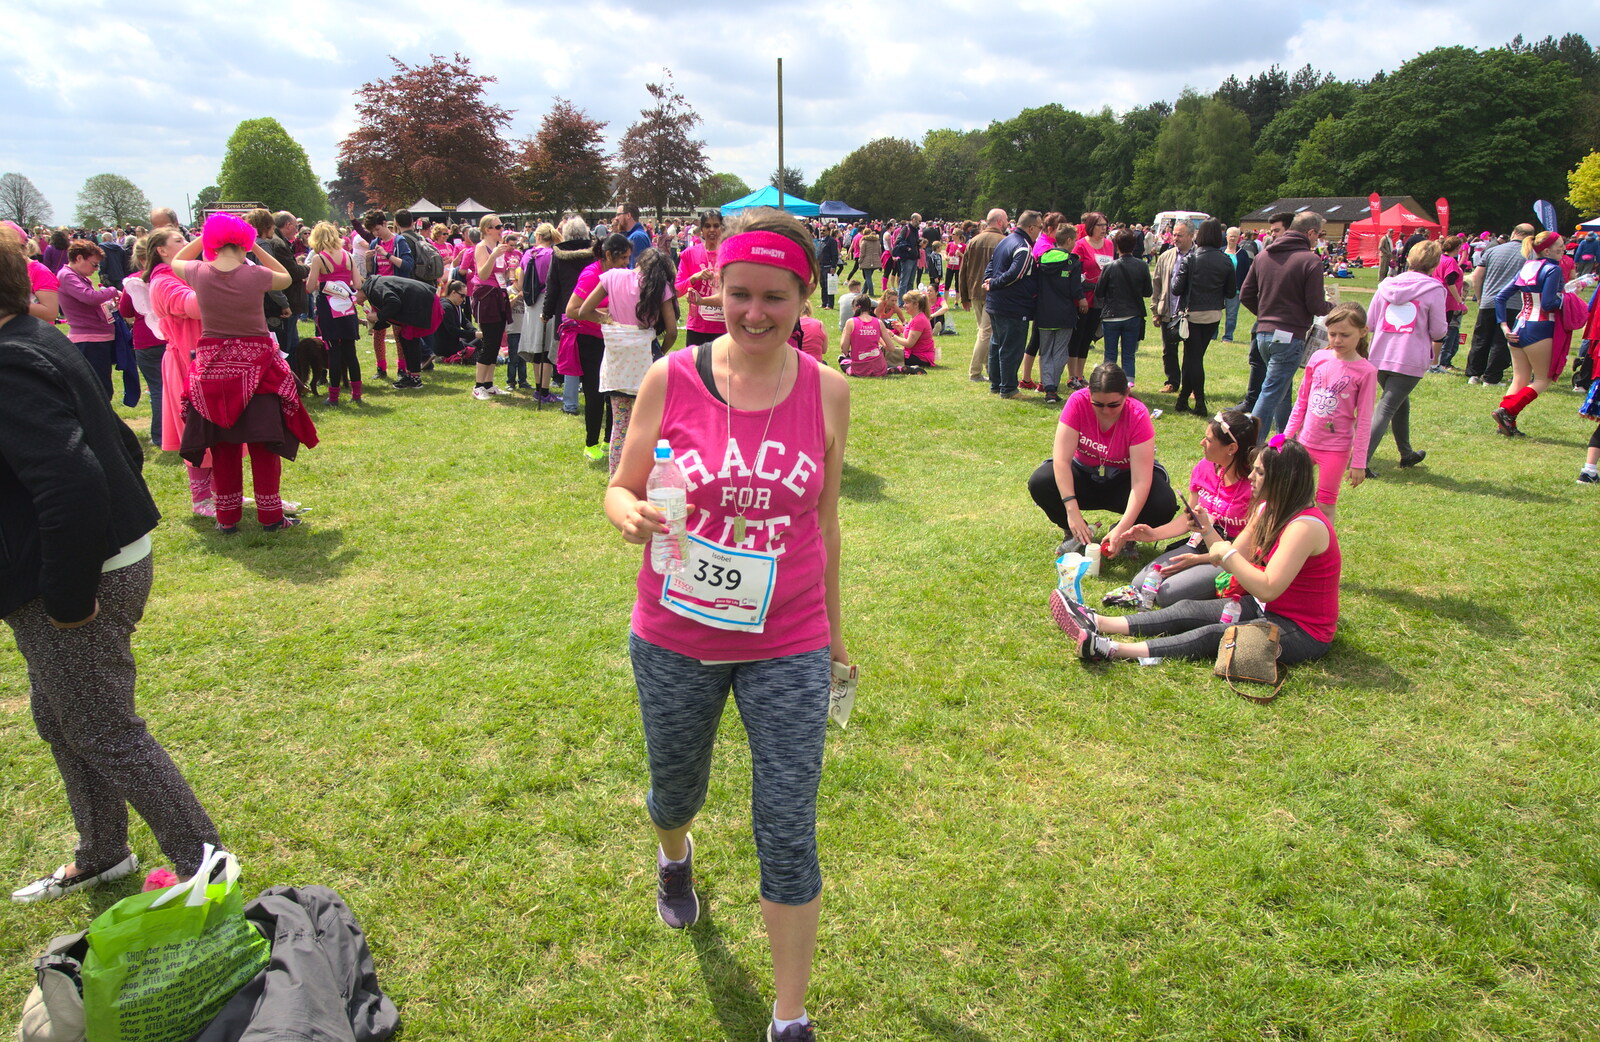 Isobel wanders around with some water from Isobel's Race for Life, Costessey, Norwich - 15th May 2016